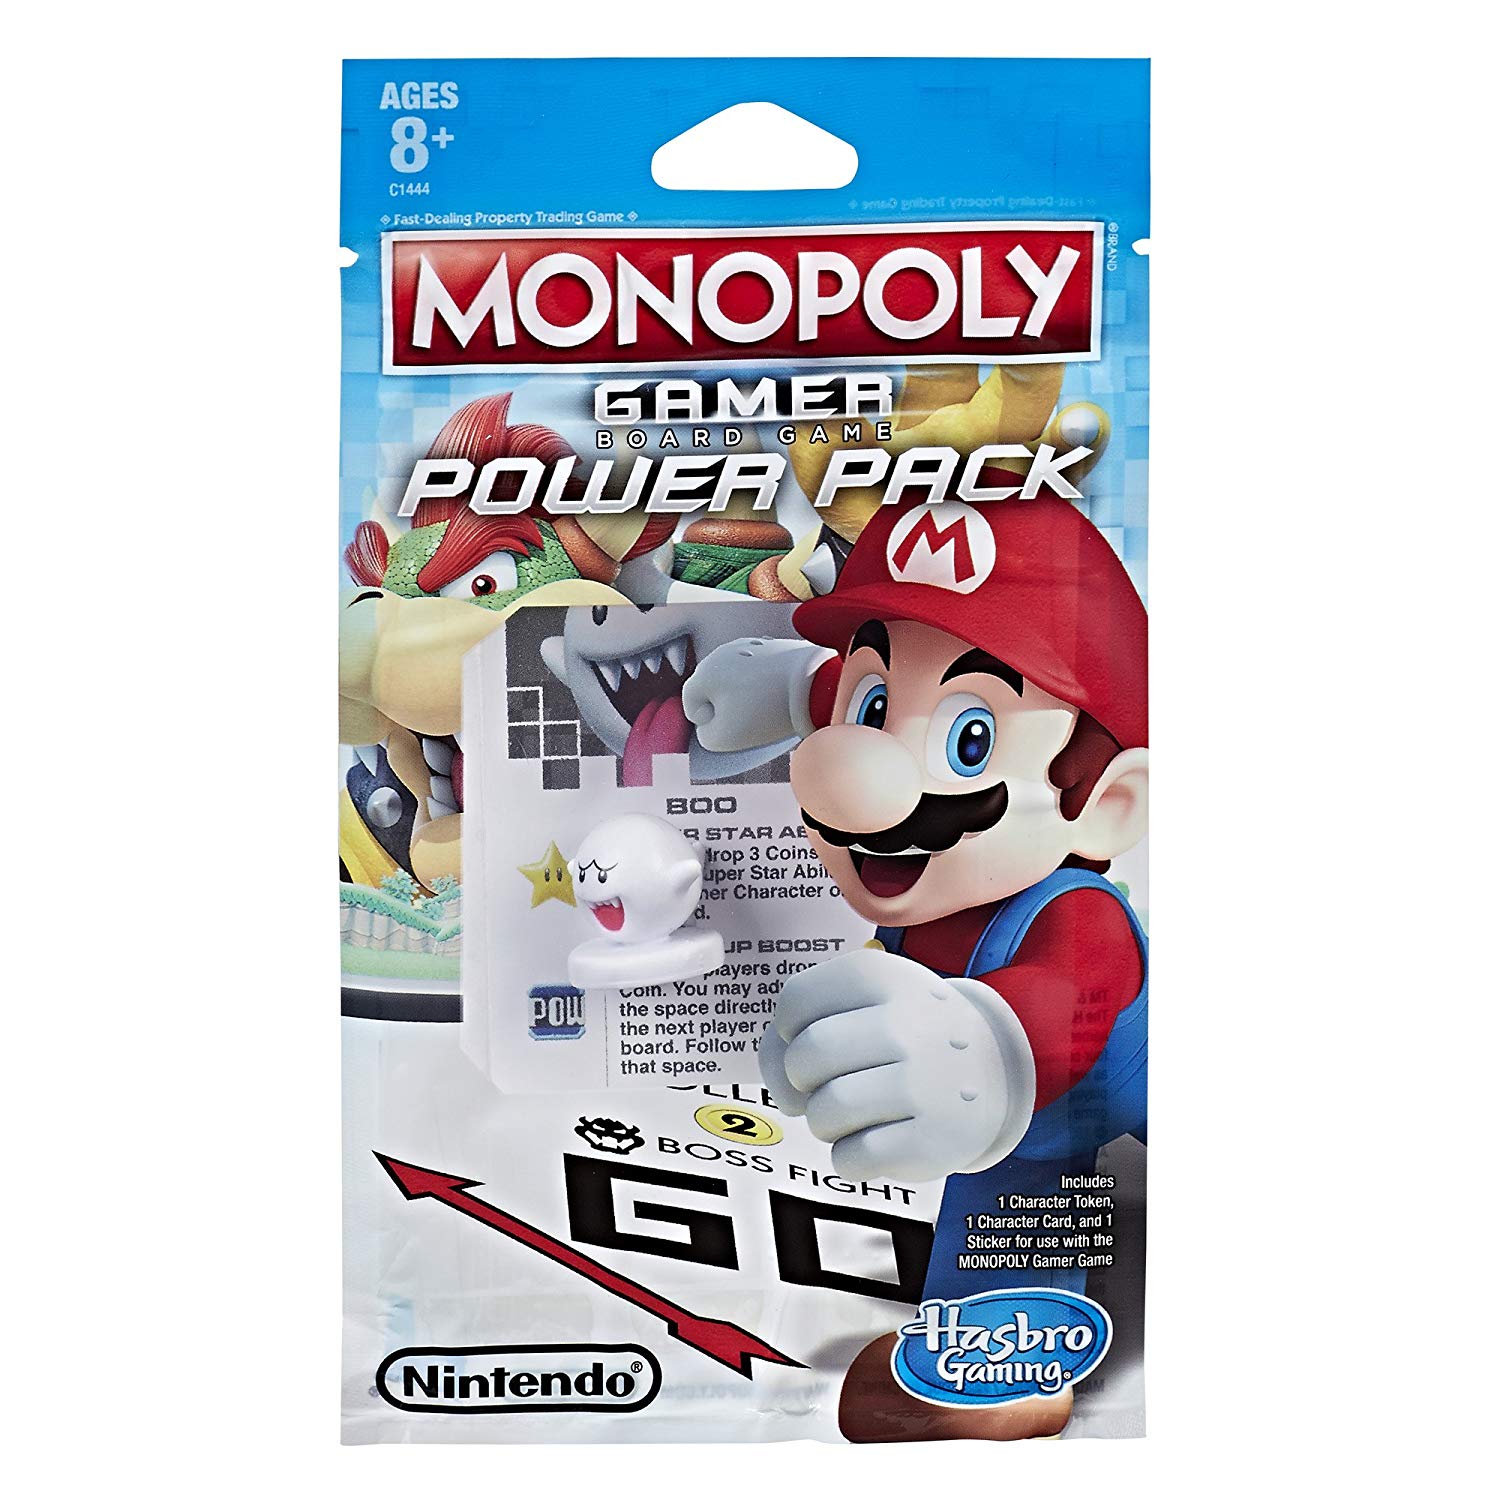 Monopoly Gamer Boo Power Pack